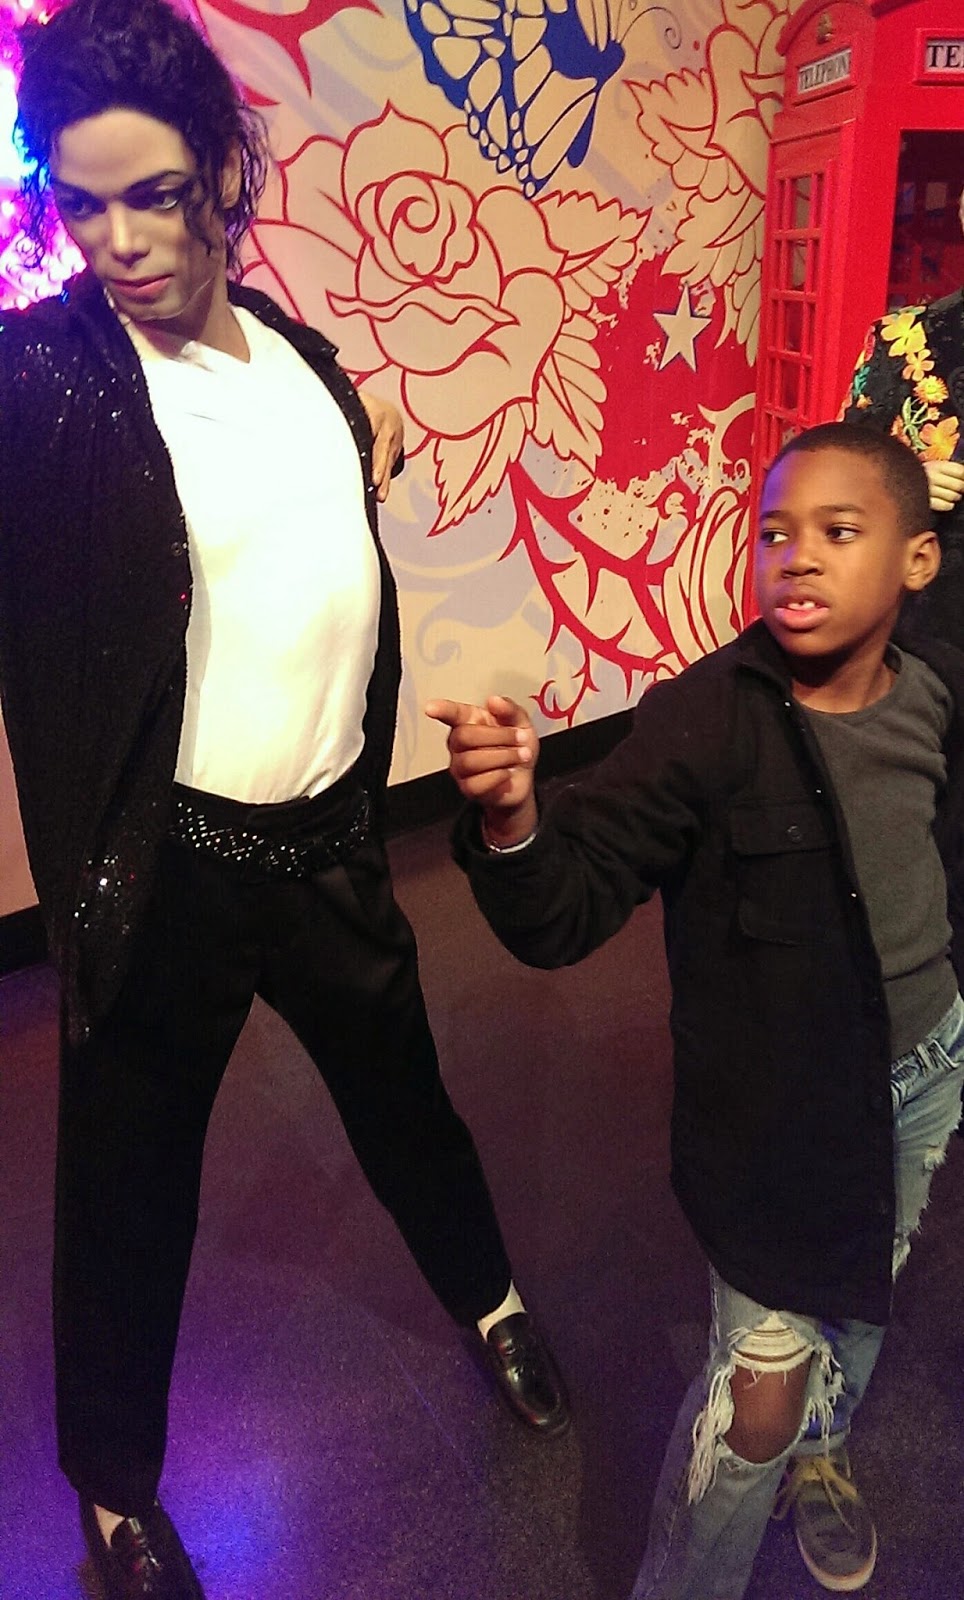 Audry%2BHepburn Hangout With Your Favorite Celebrities at Madame Tussauds Hollywood